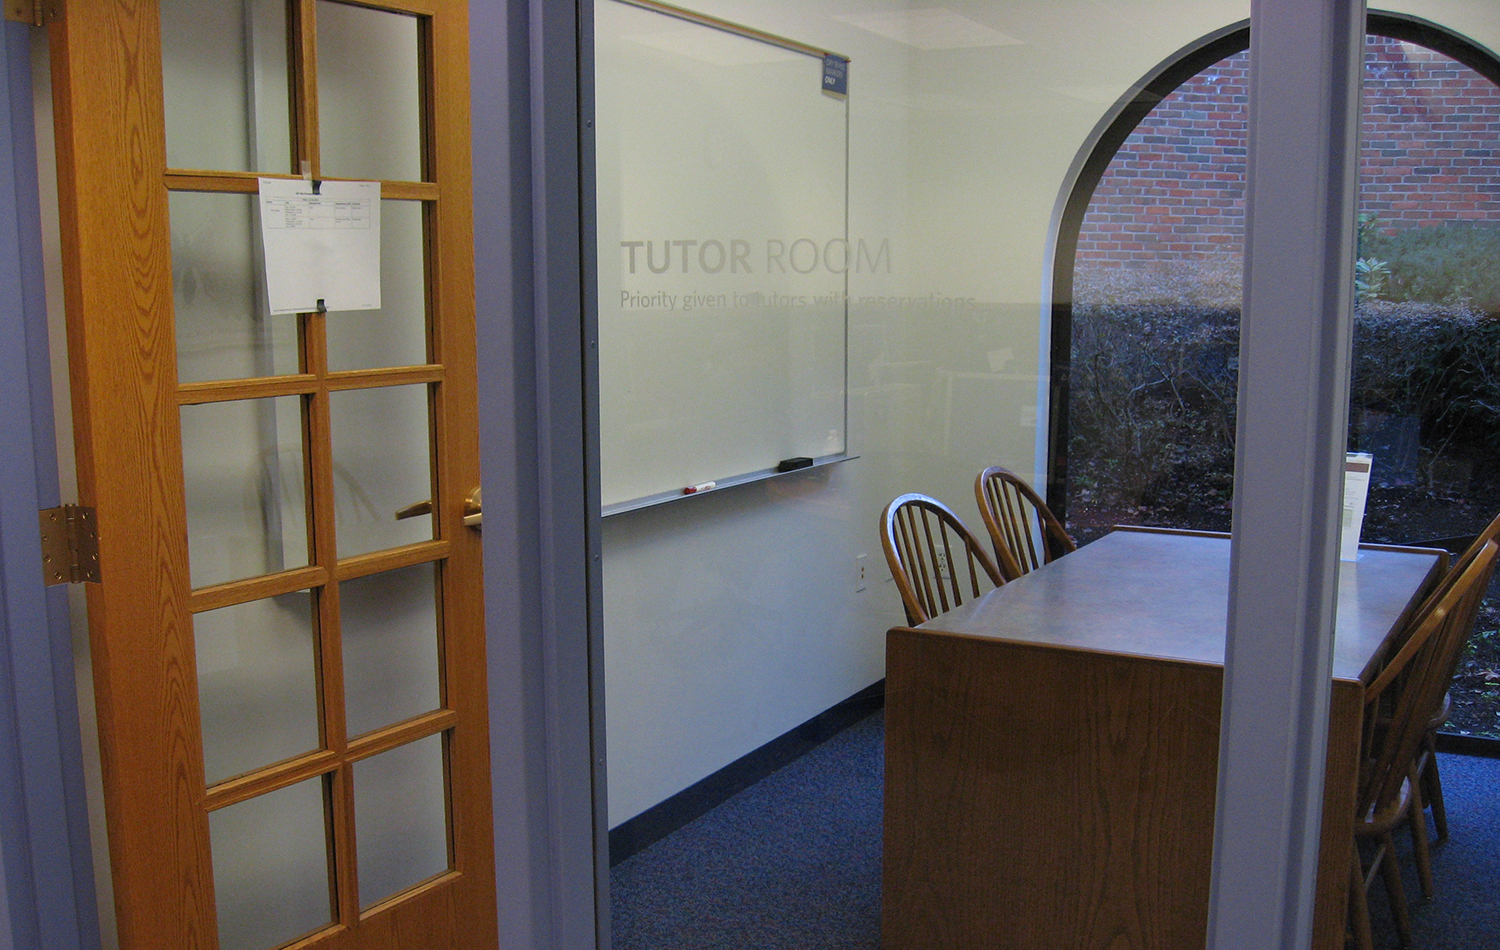 View of the Chipmunk Study Room equipped with a table, chairs, and white board